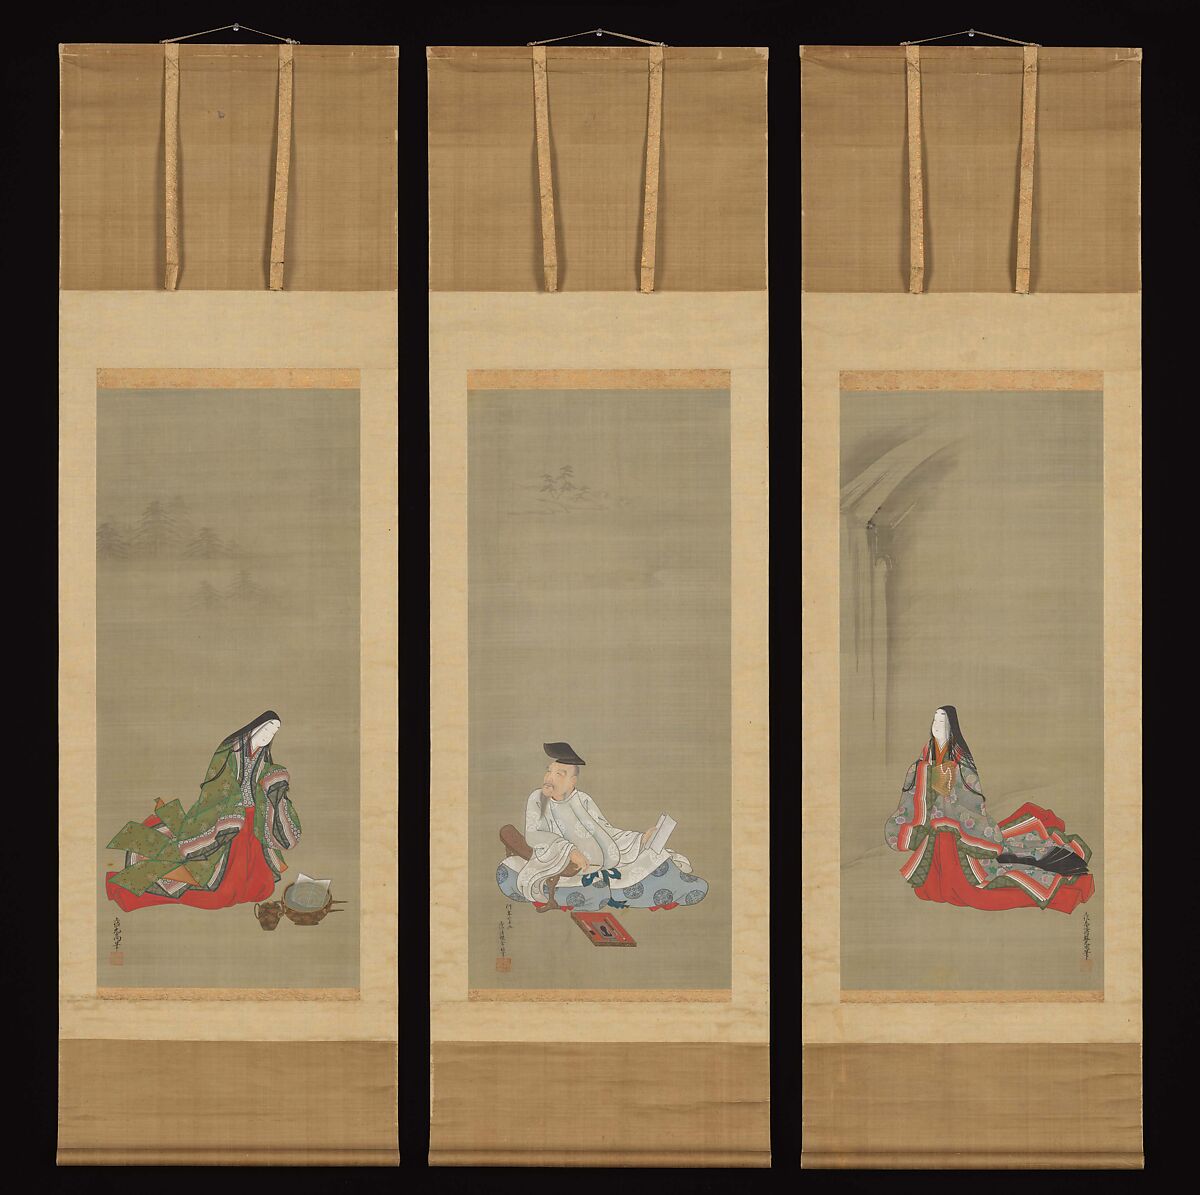 Portraits of Three Famous Poets: Hitomaro (M) ・Ise (R) ・Komachi (L), Tosa Mitsuoki 土佐光起 (Japanese, 1617–1691), Triptych of hanging scrolls: ink, color, gold and silver on silk, Japan 